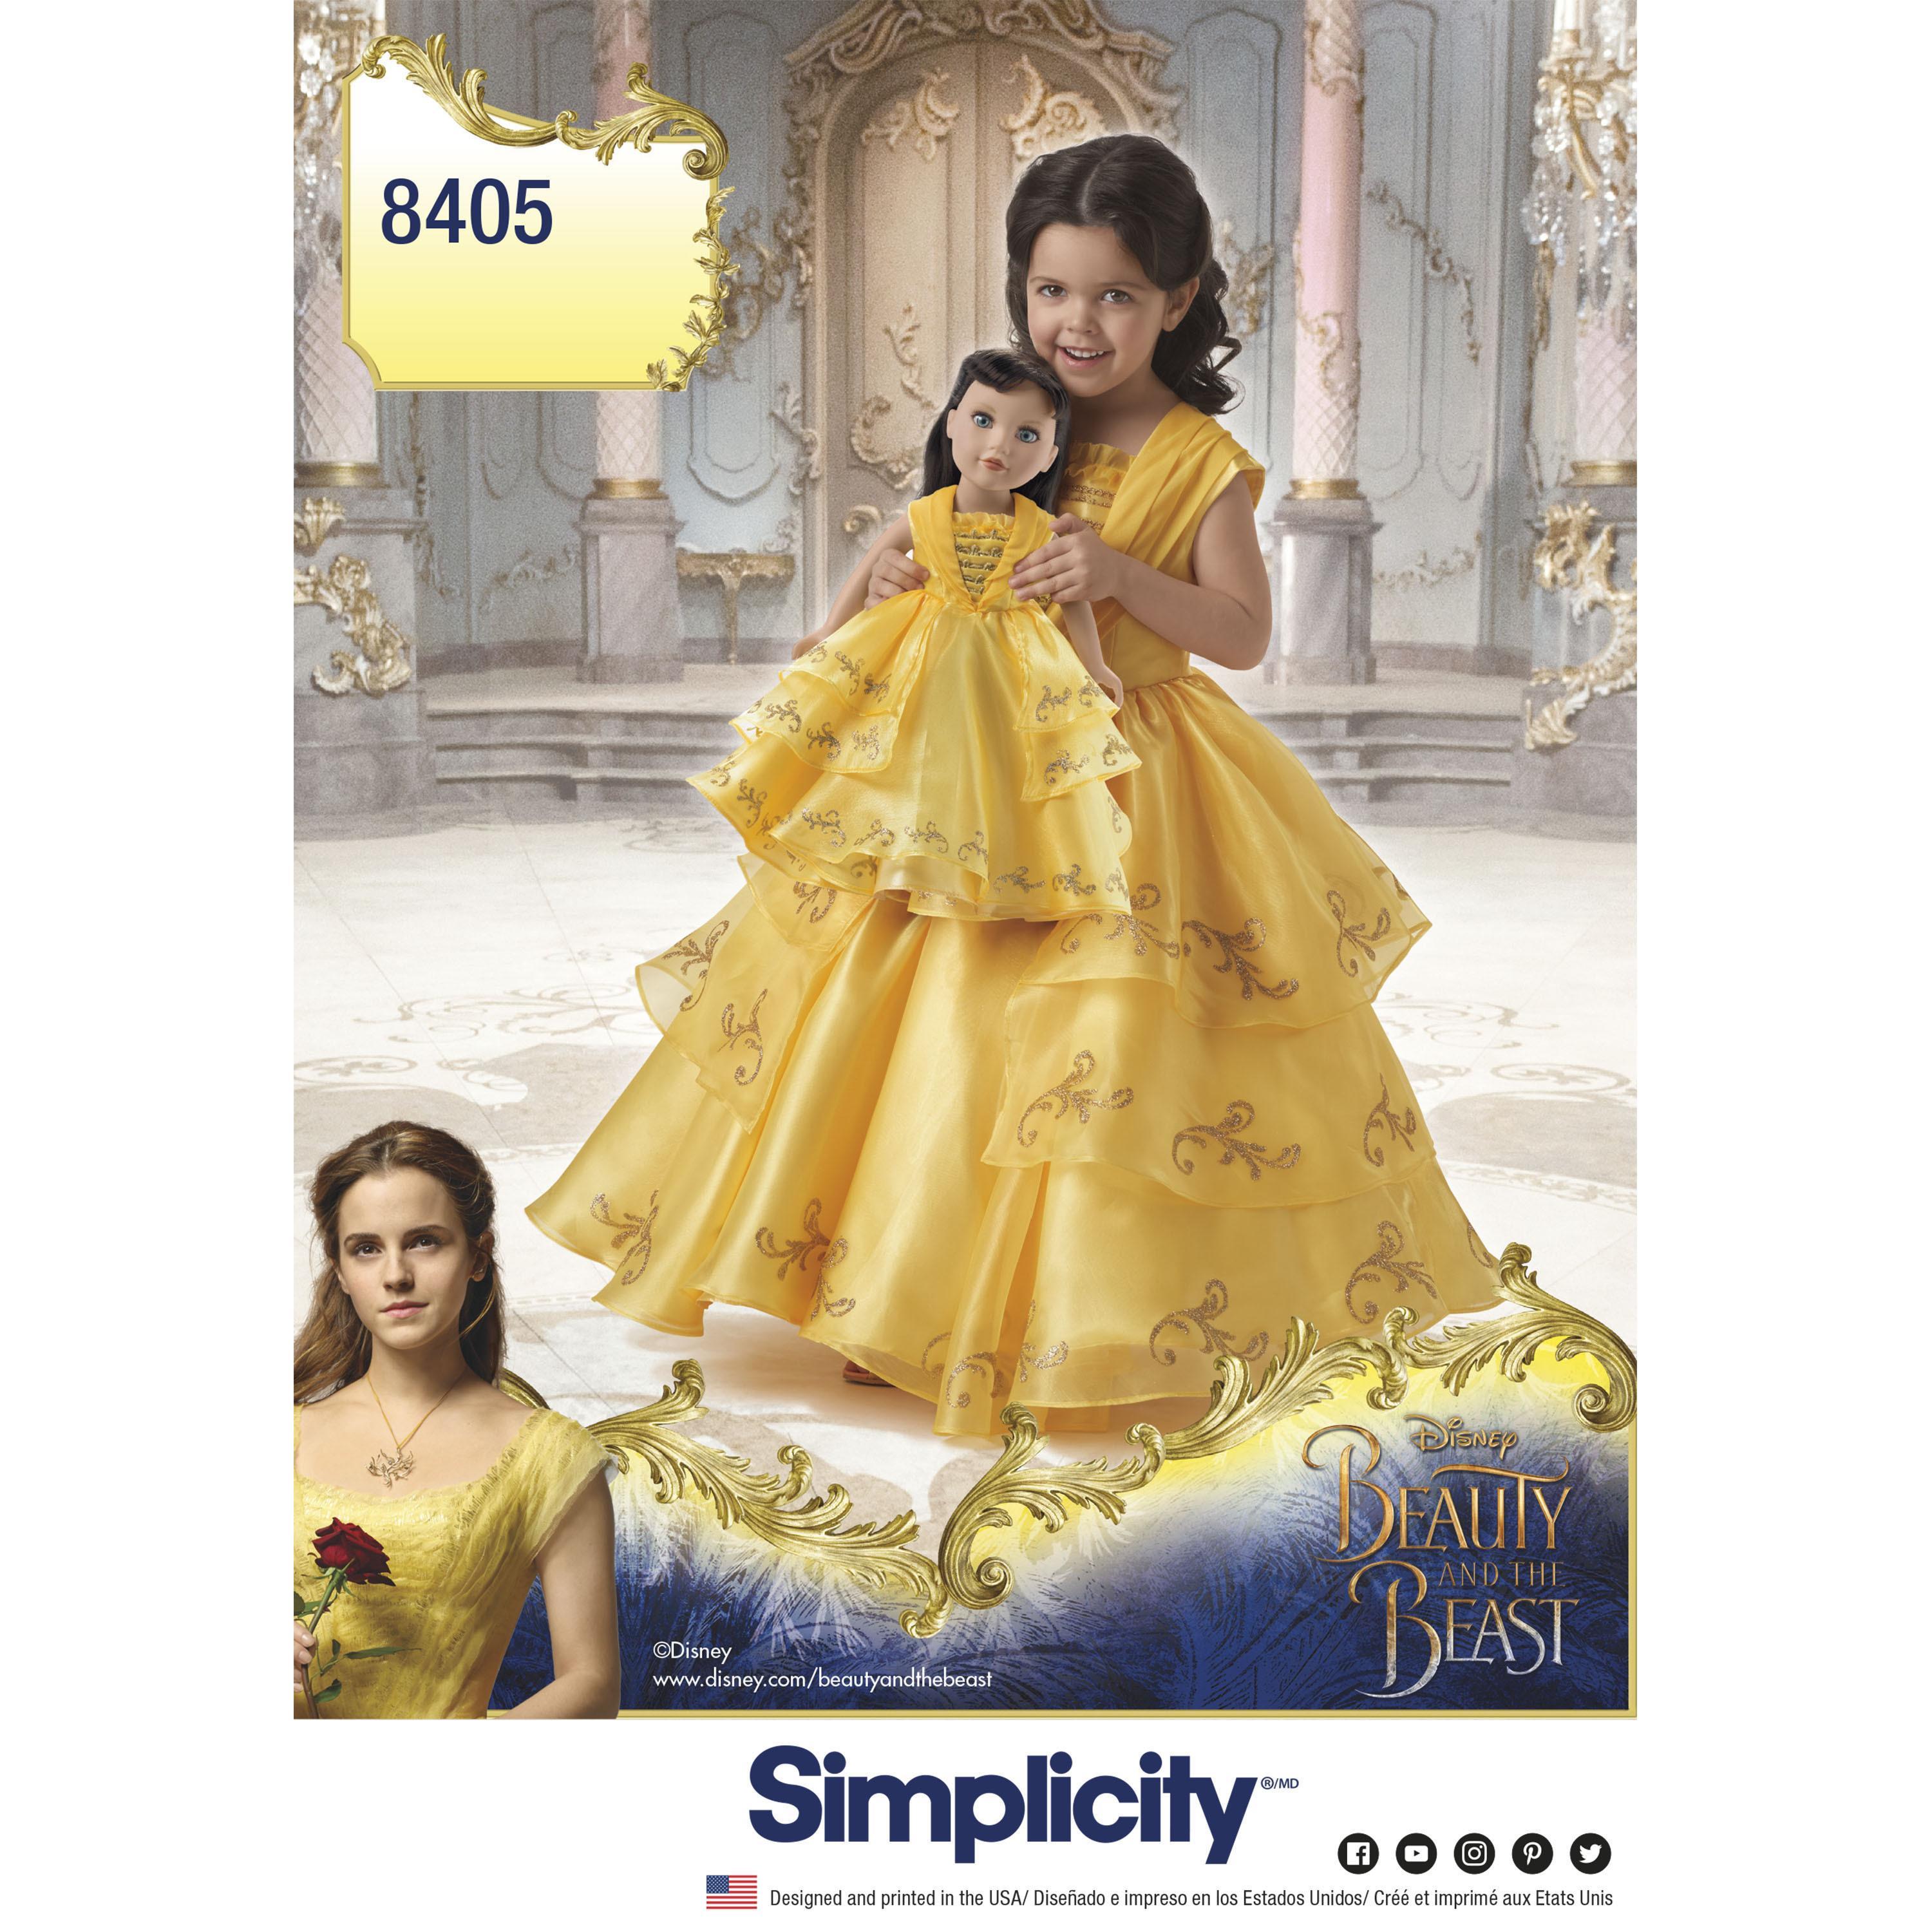 Simplicity Pattern 8405 Disney Beauty and the Beast Costume for Child and 18" Doll Simplicity Sewing Pattern 8405